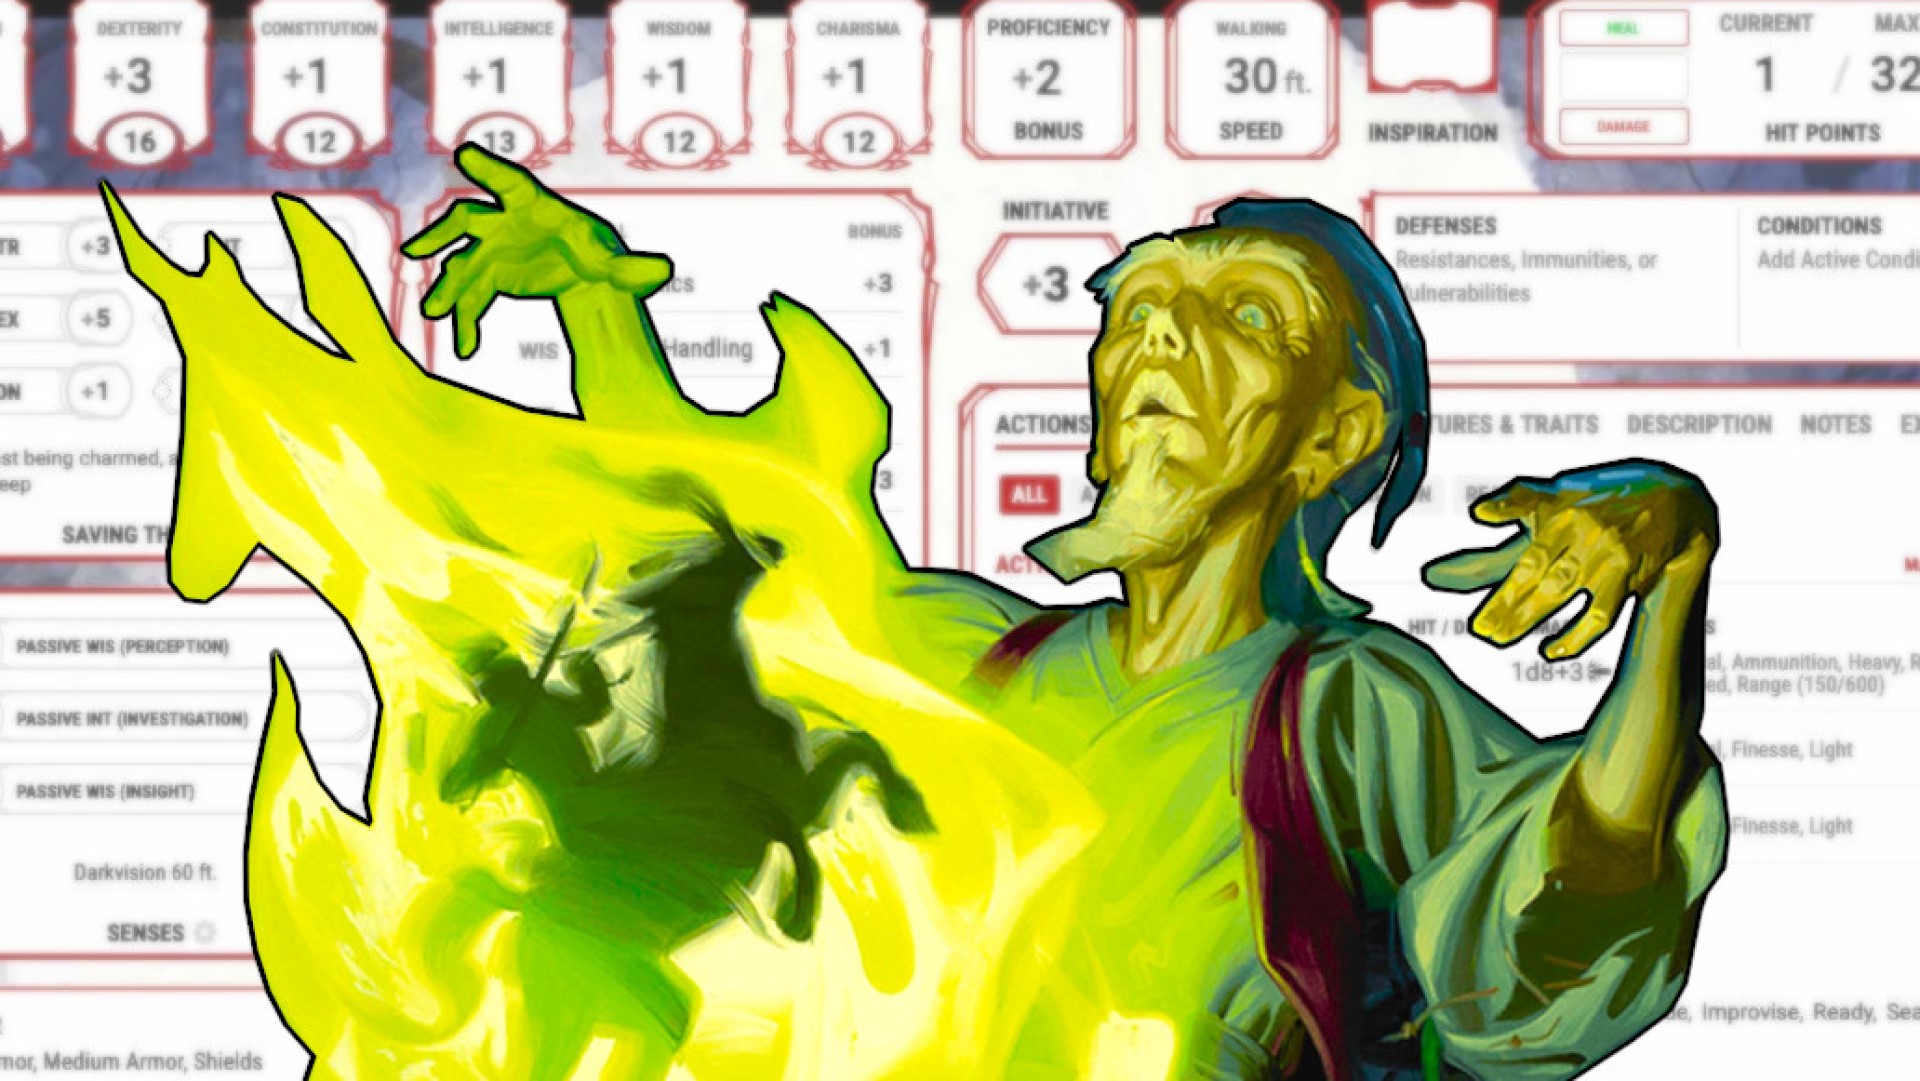 How to create your first character in D&D